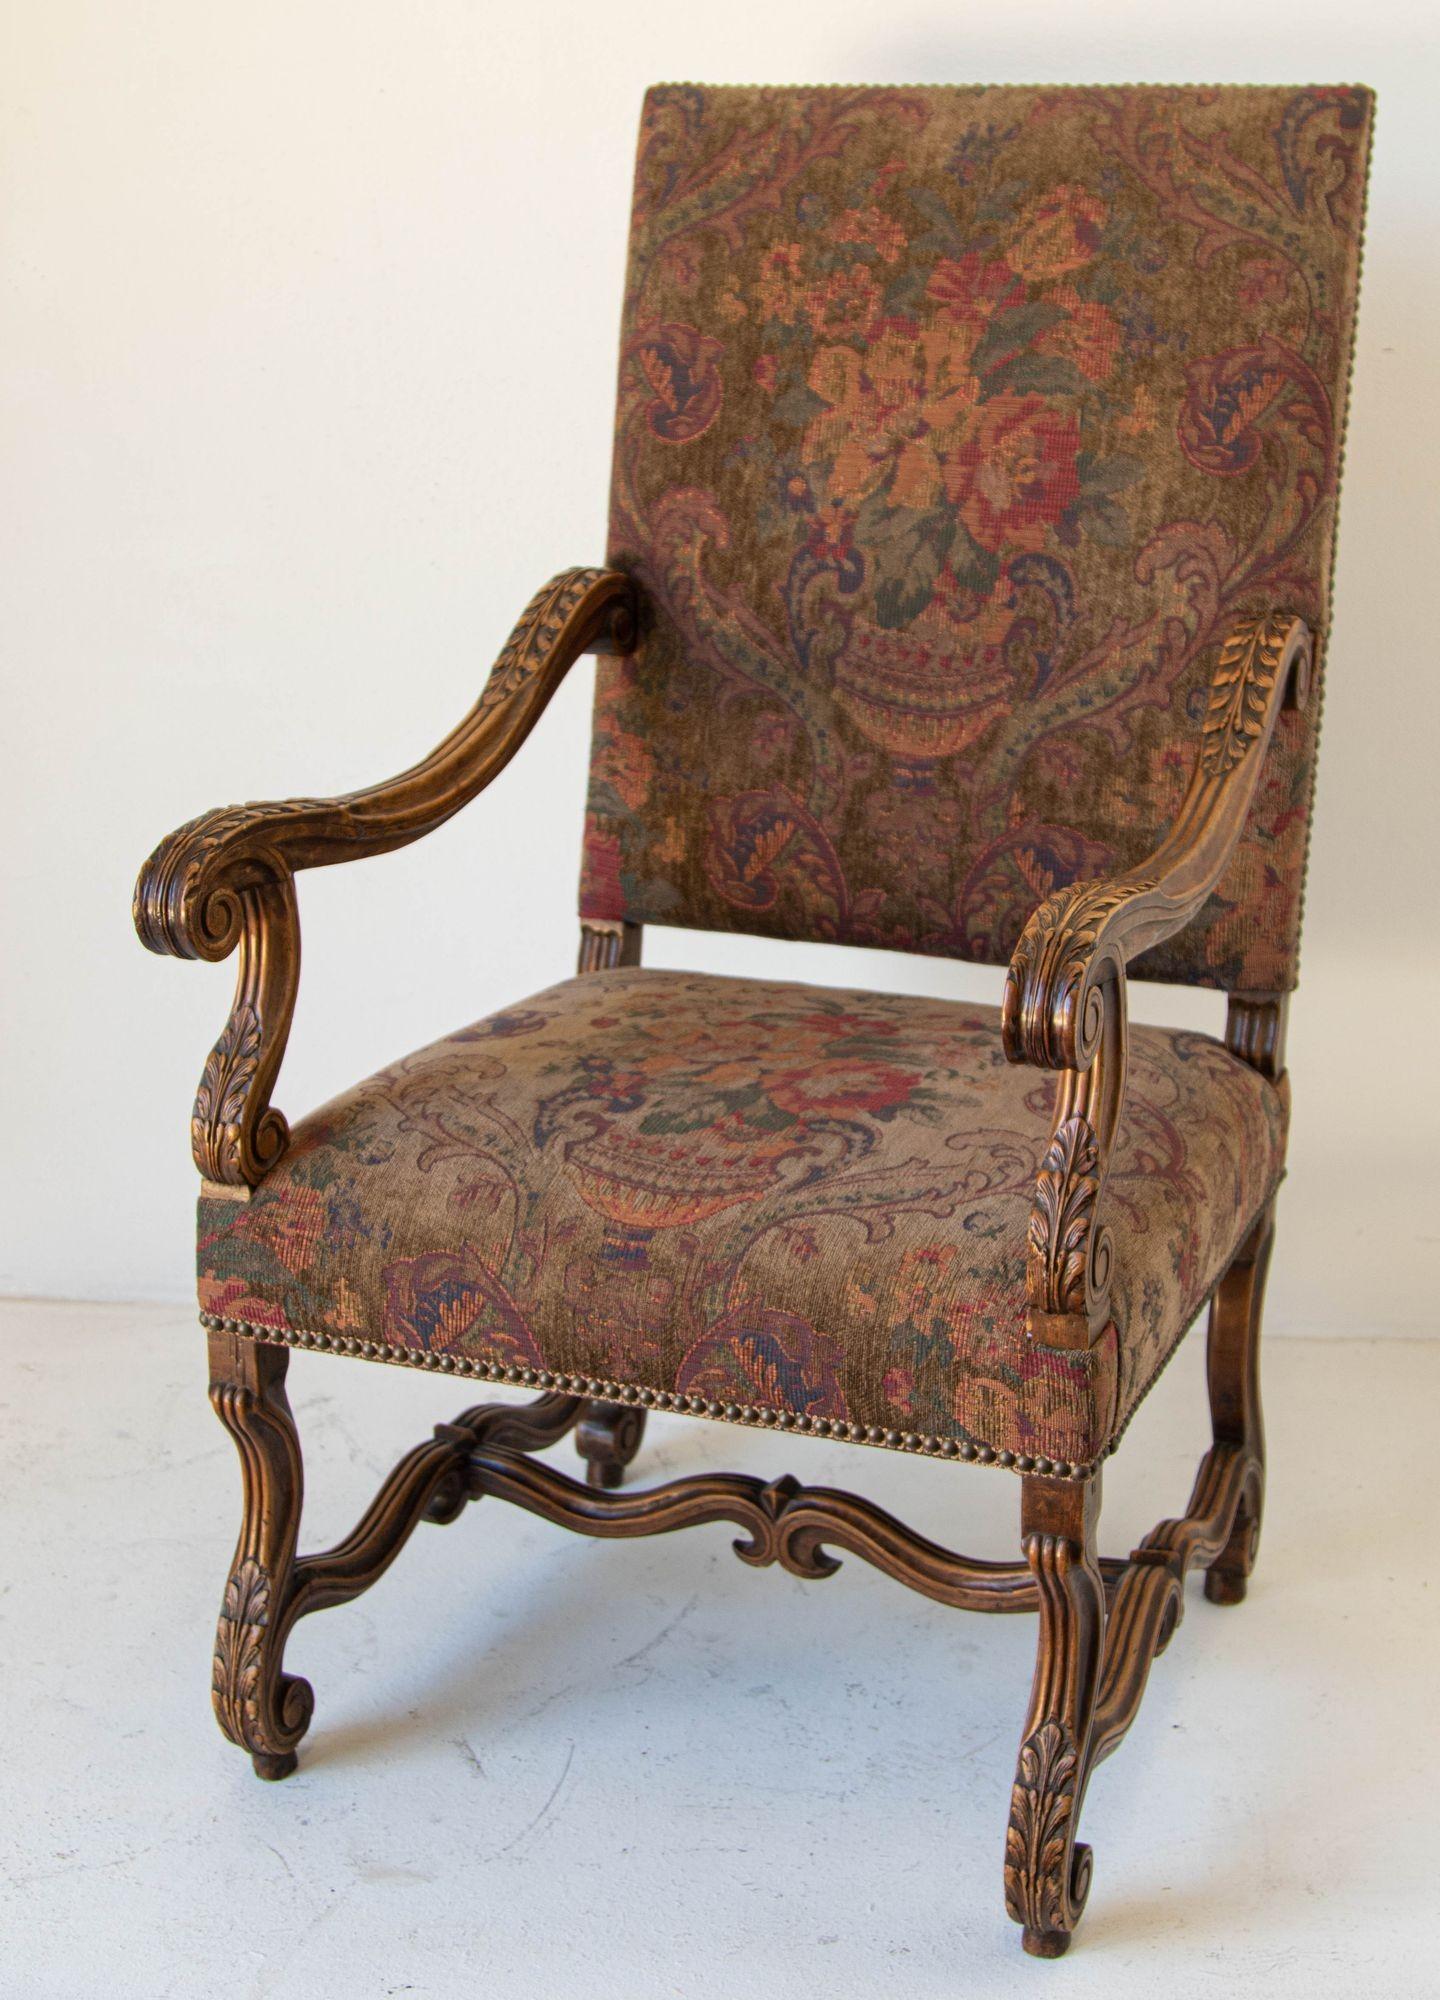 A Pair of French Baroque Walnut Armchairs Provincial Fauteuils à la Reine with Needlework Aubusson style upholestry.
A pair of French provincial, Louis XIV-style fauteuils à la reine in walnut with carved acanthus scrolled curvaceous sweeping arms